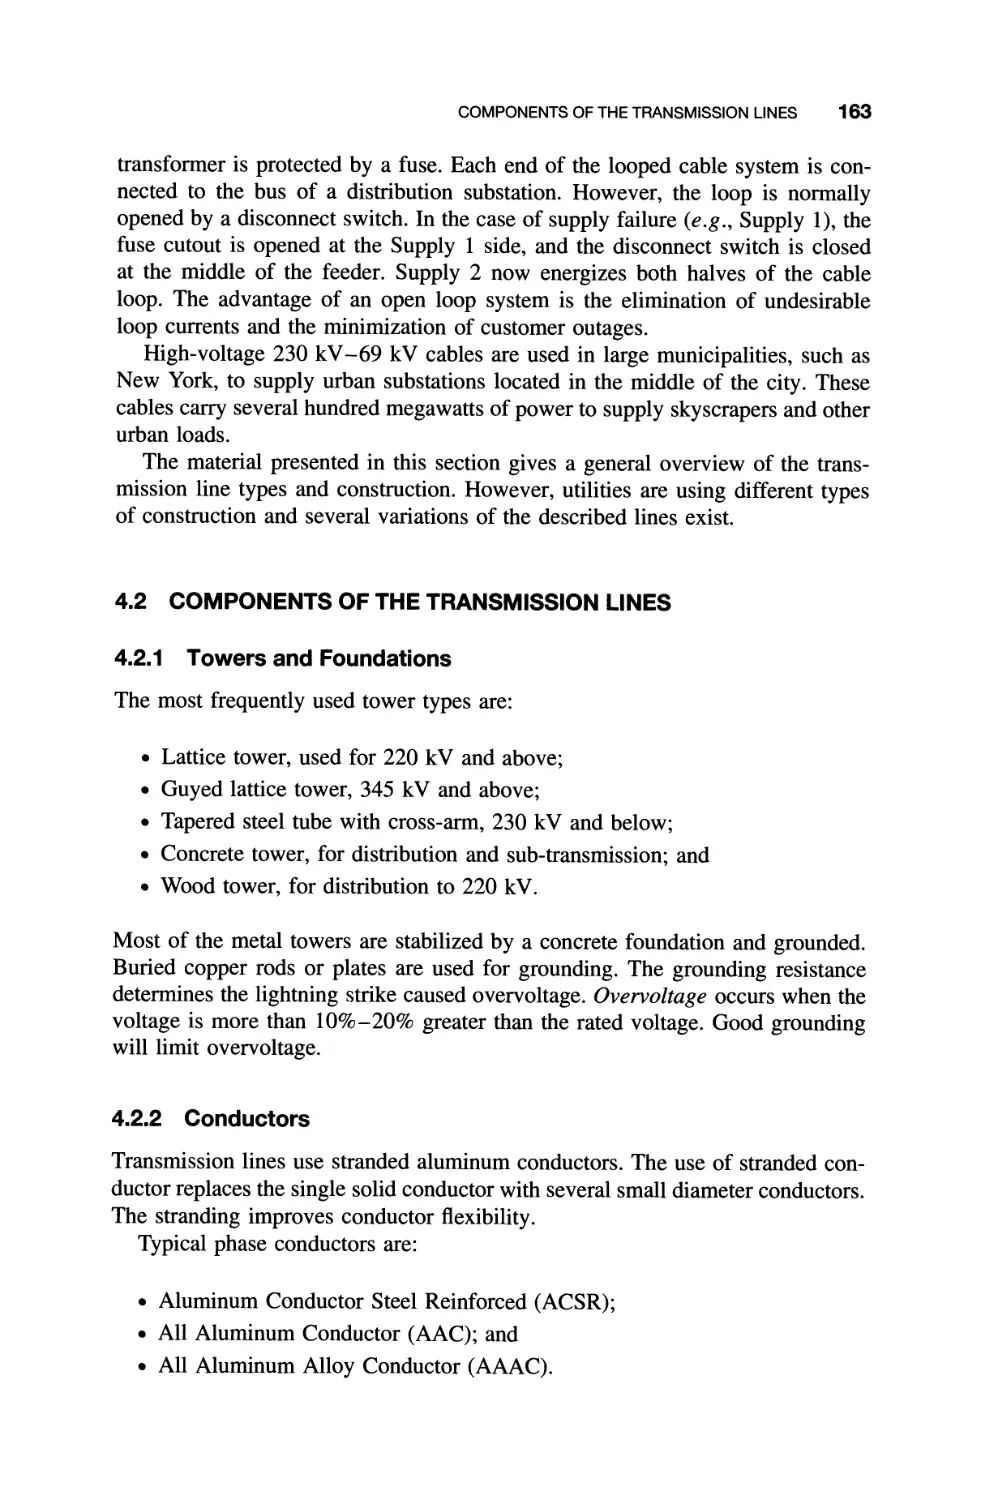 4.2 Components of the Transmission Lines
4.2.2 Conductors